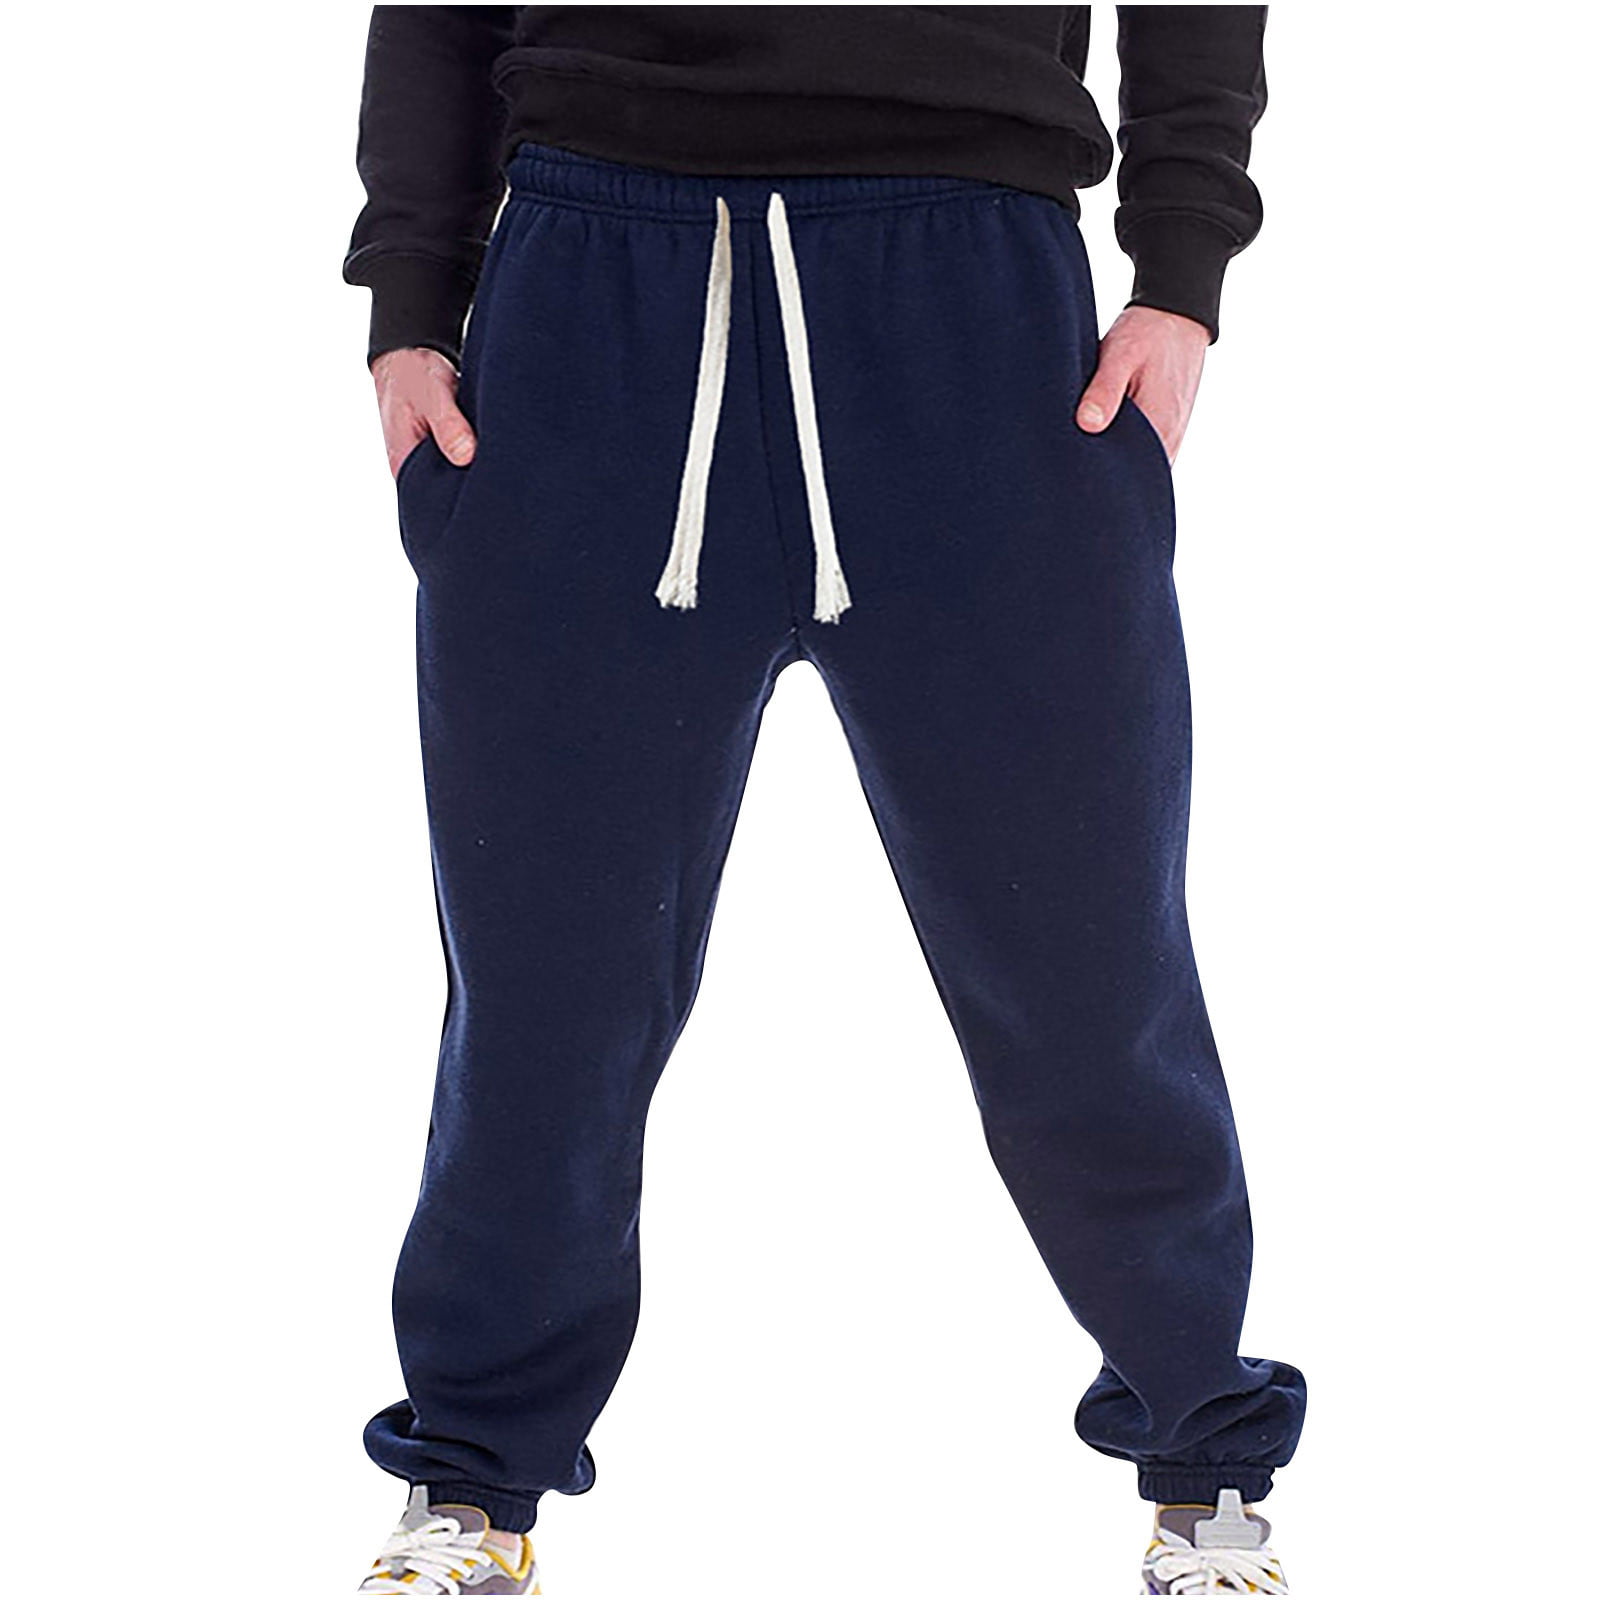 RQYYD Mens Sweatpants with Pockets Drawstring Athletic Pants